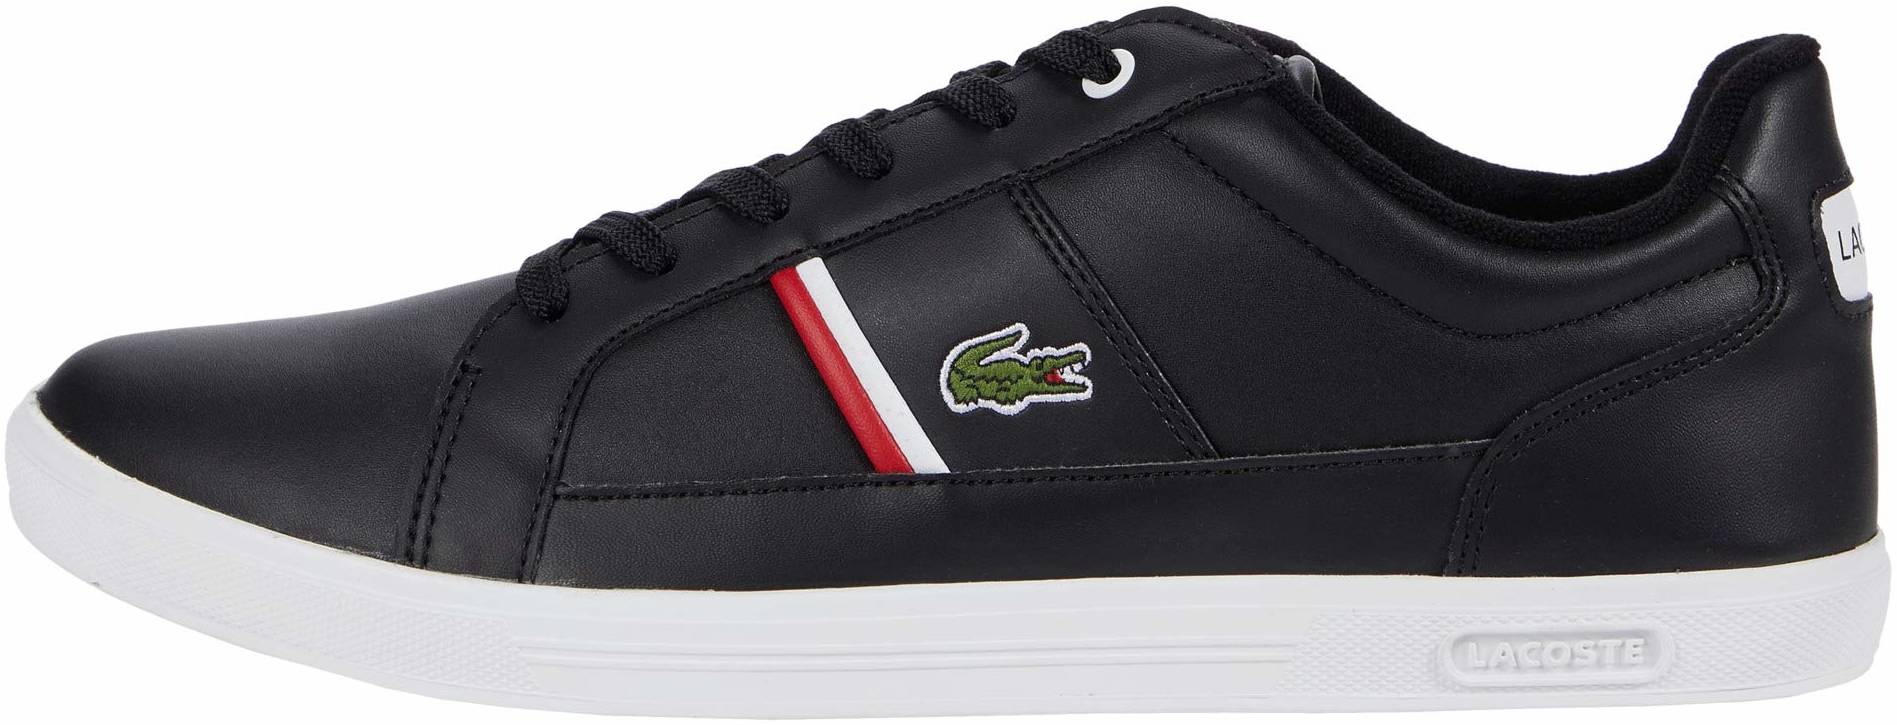 10+ Lacoste sneakers: Save up to 51% |